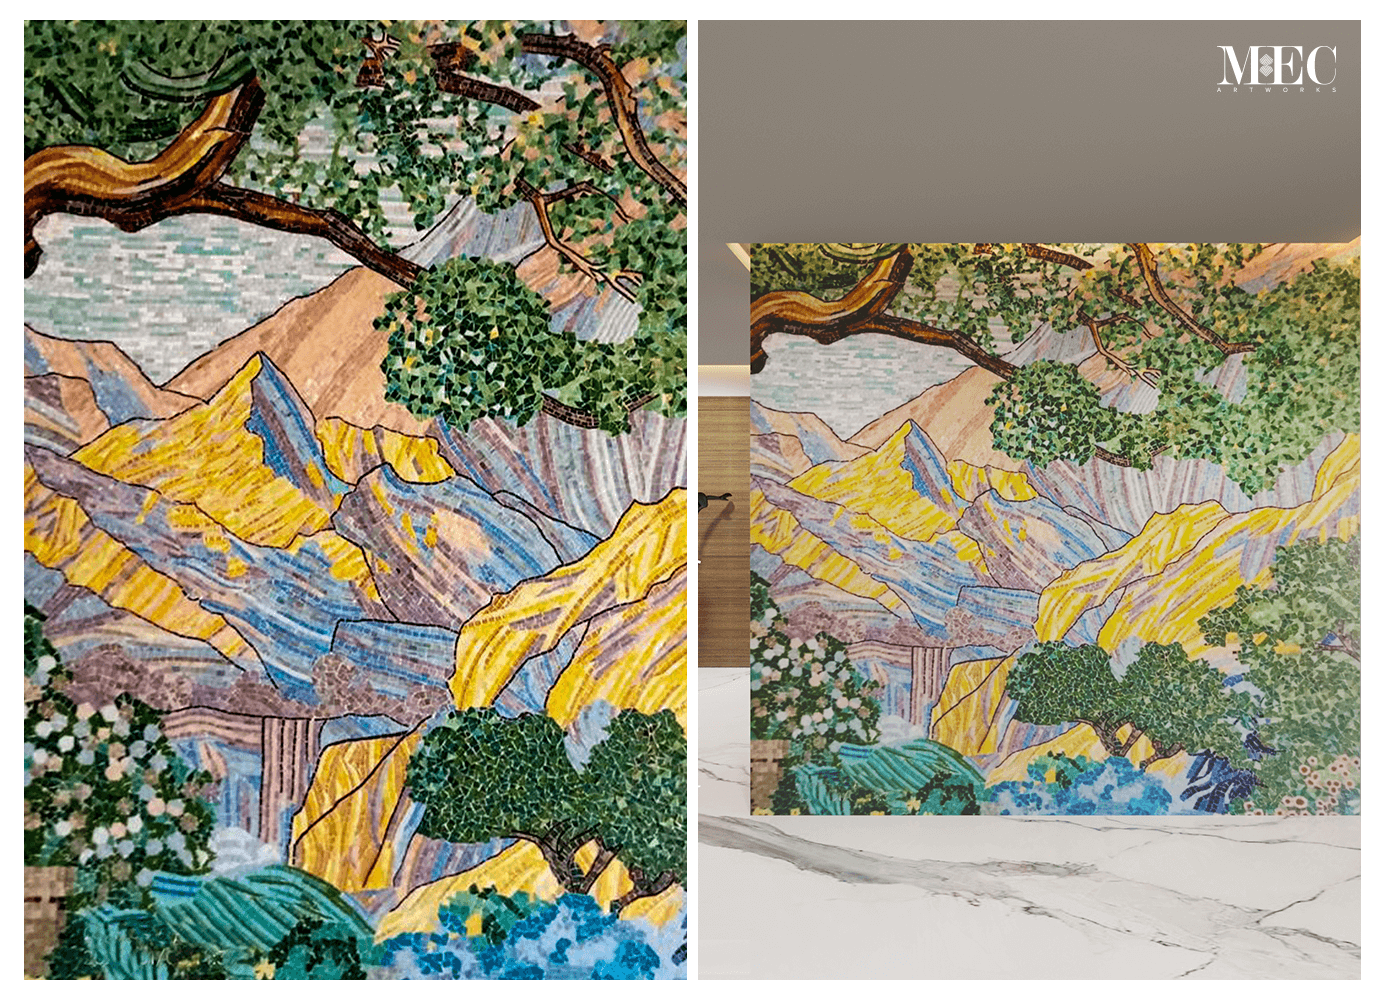 A colorful mosaic artwork depicting a scenic landscape with mountains, trees, and flowers, partially completed with tiles on the right side.